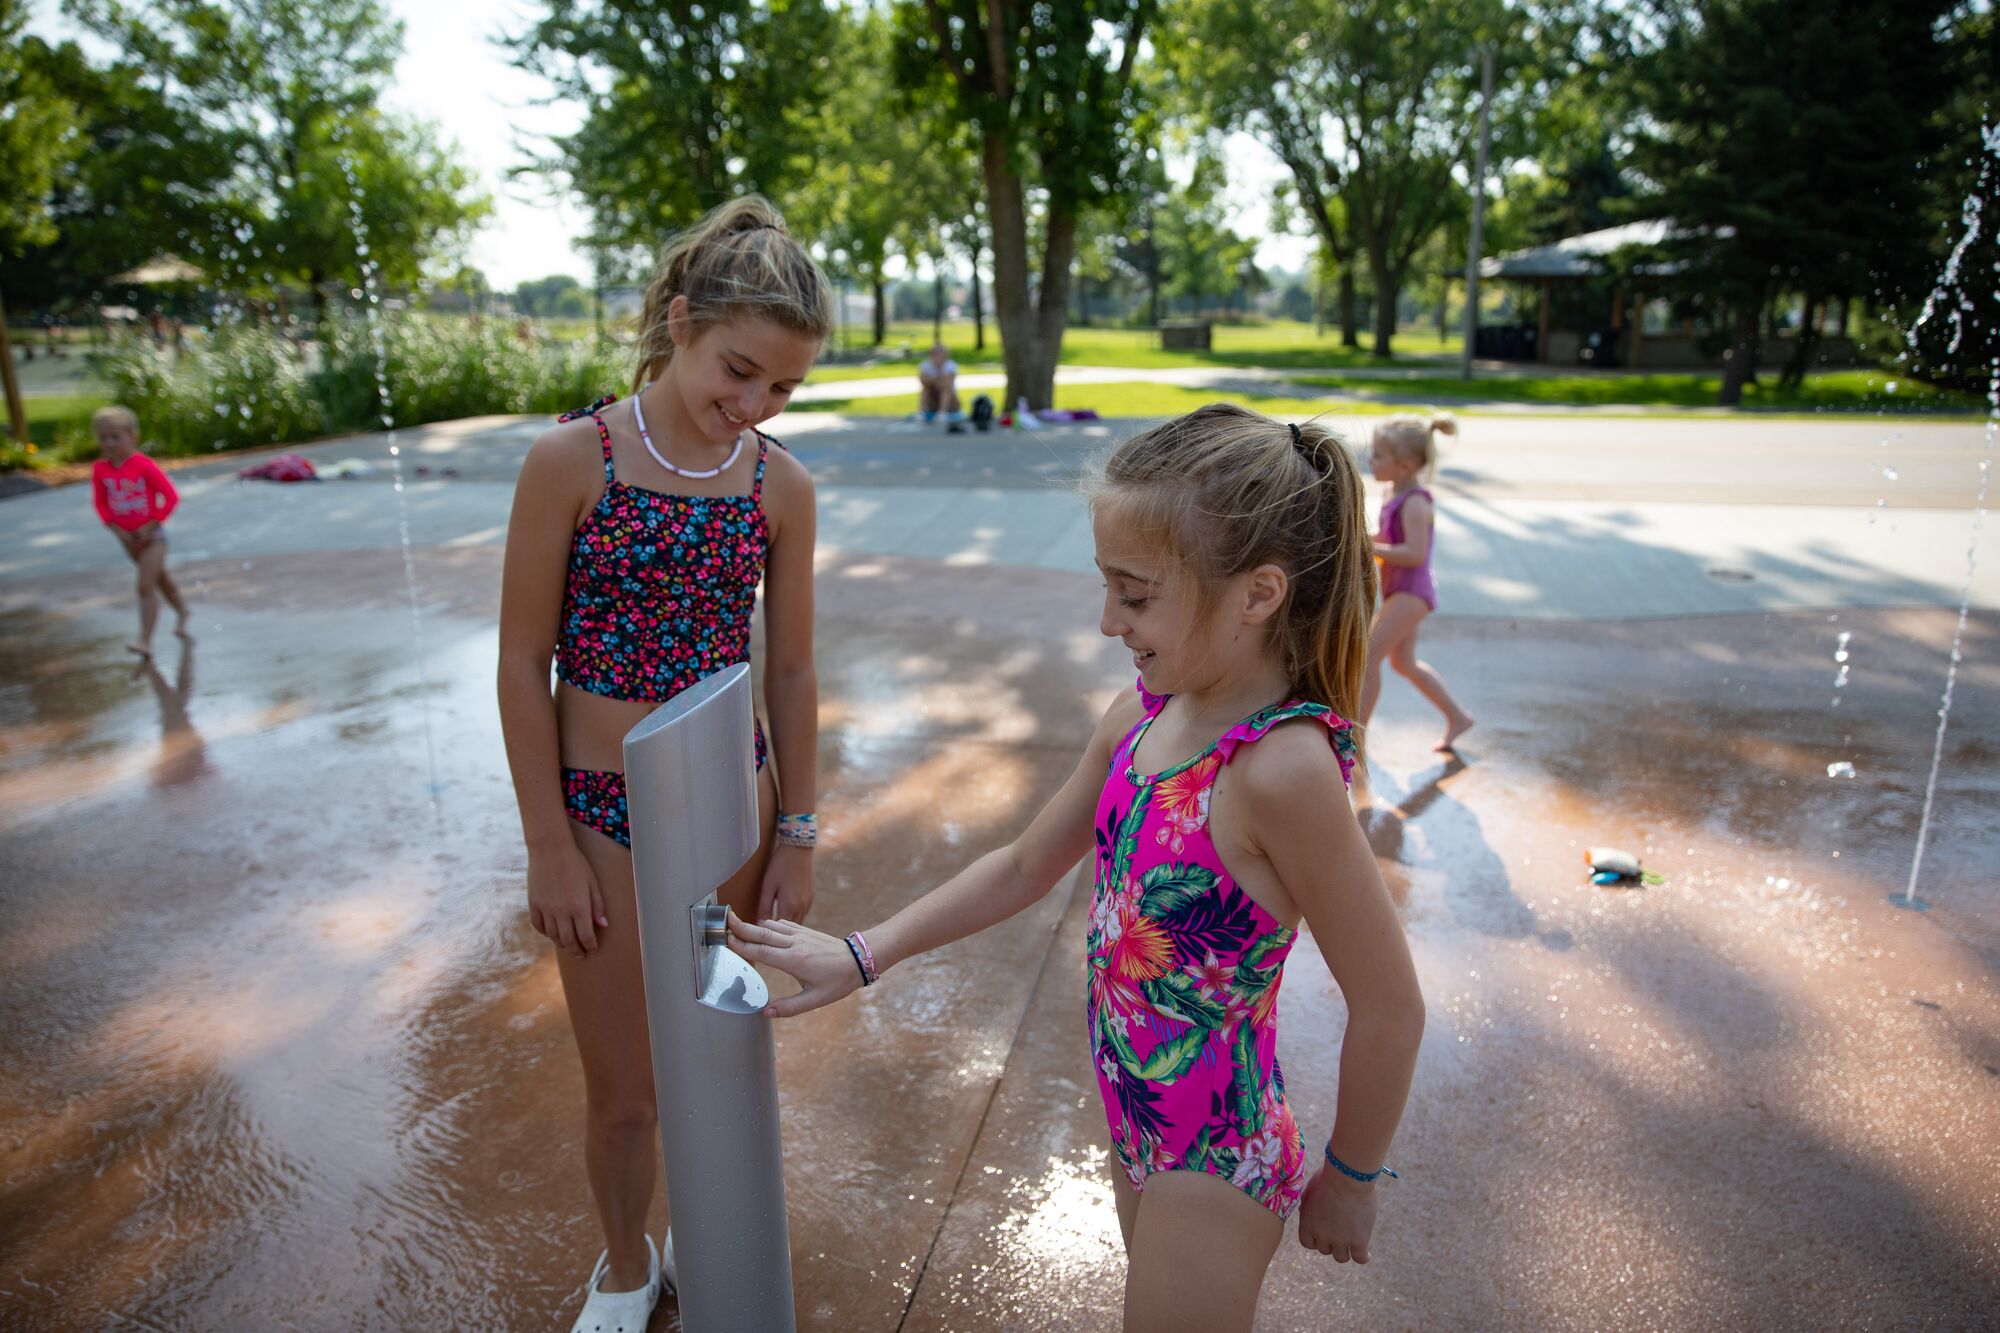 The HydroLogix Activation Bollard starts the AquaSmart splash pad packages with the push of a button